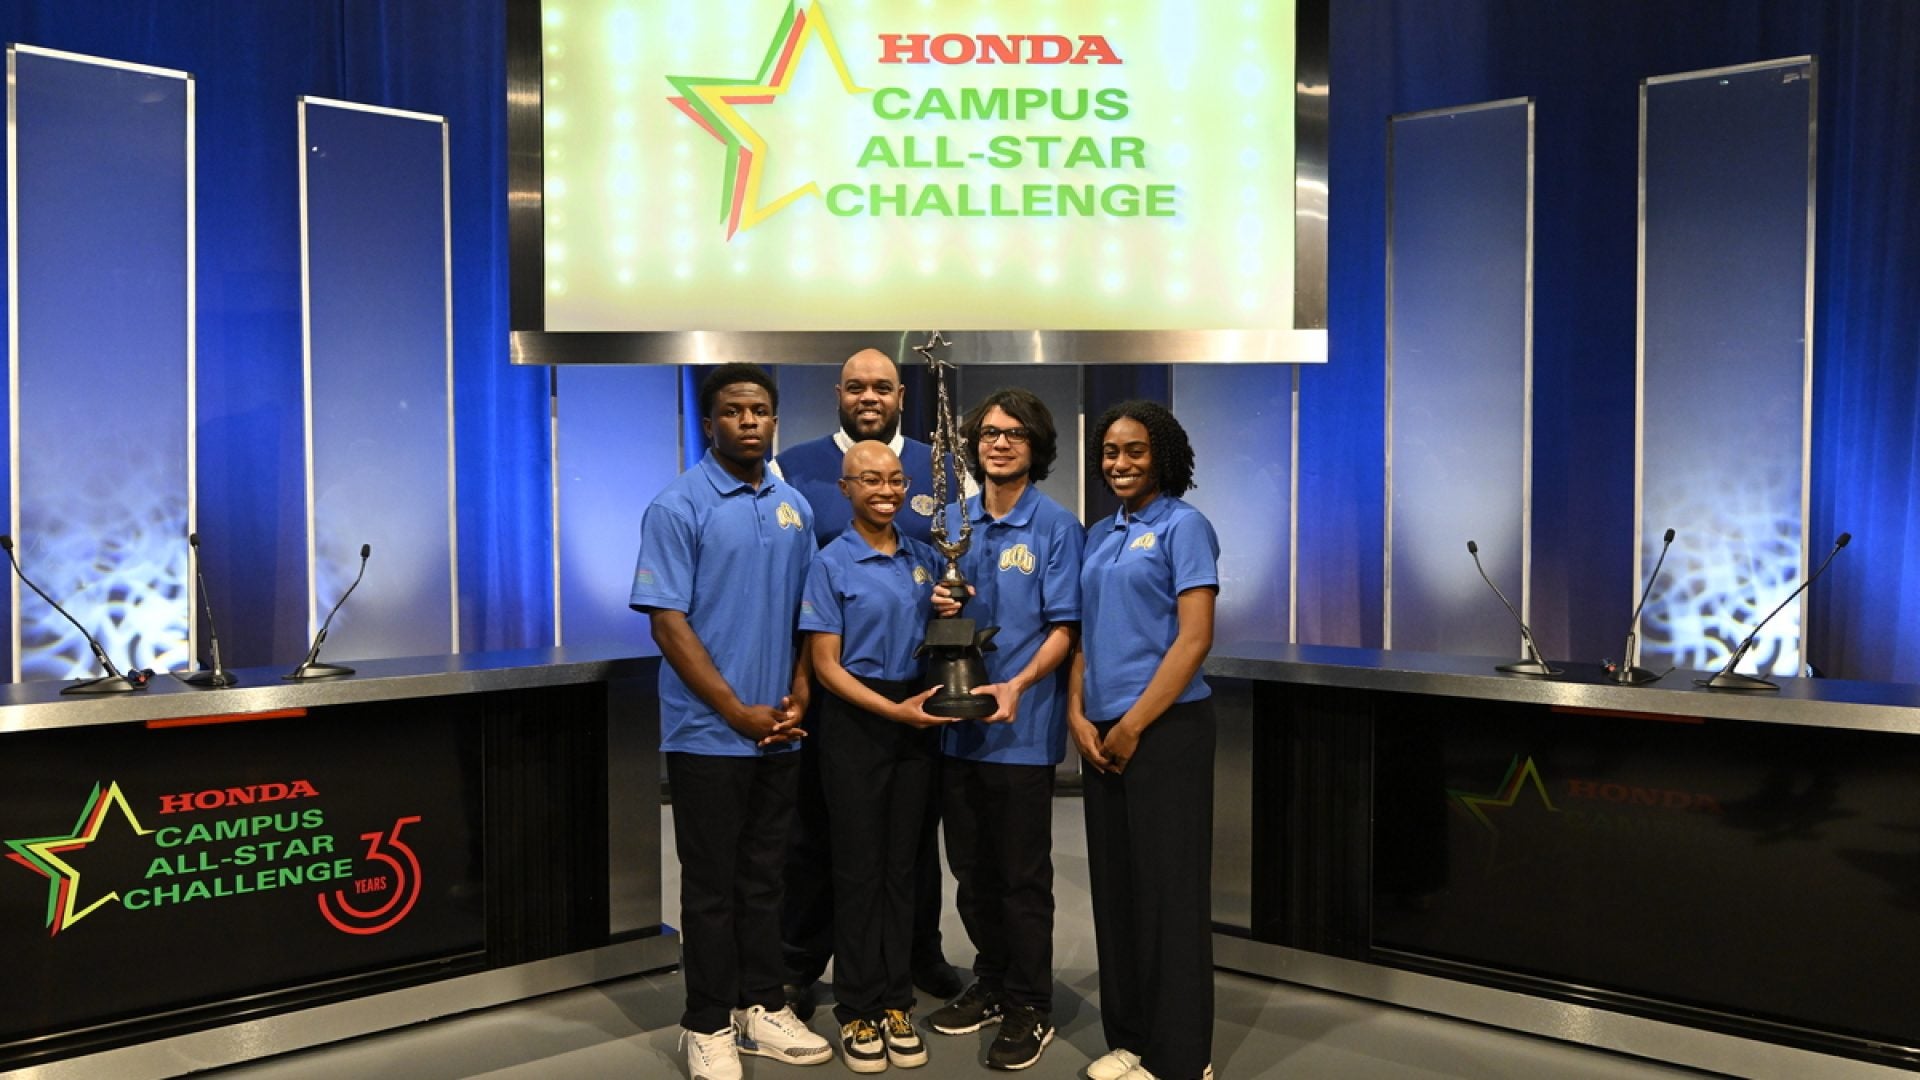 HBCU Oakwood University Is The 35th Honda Campus All-Star Challenge National Champion